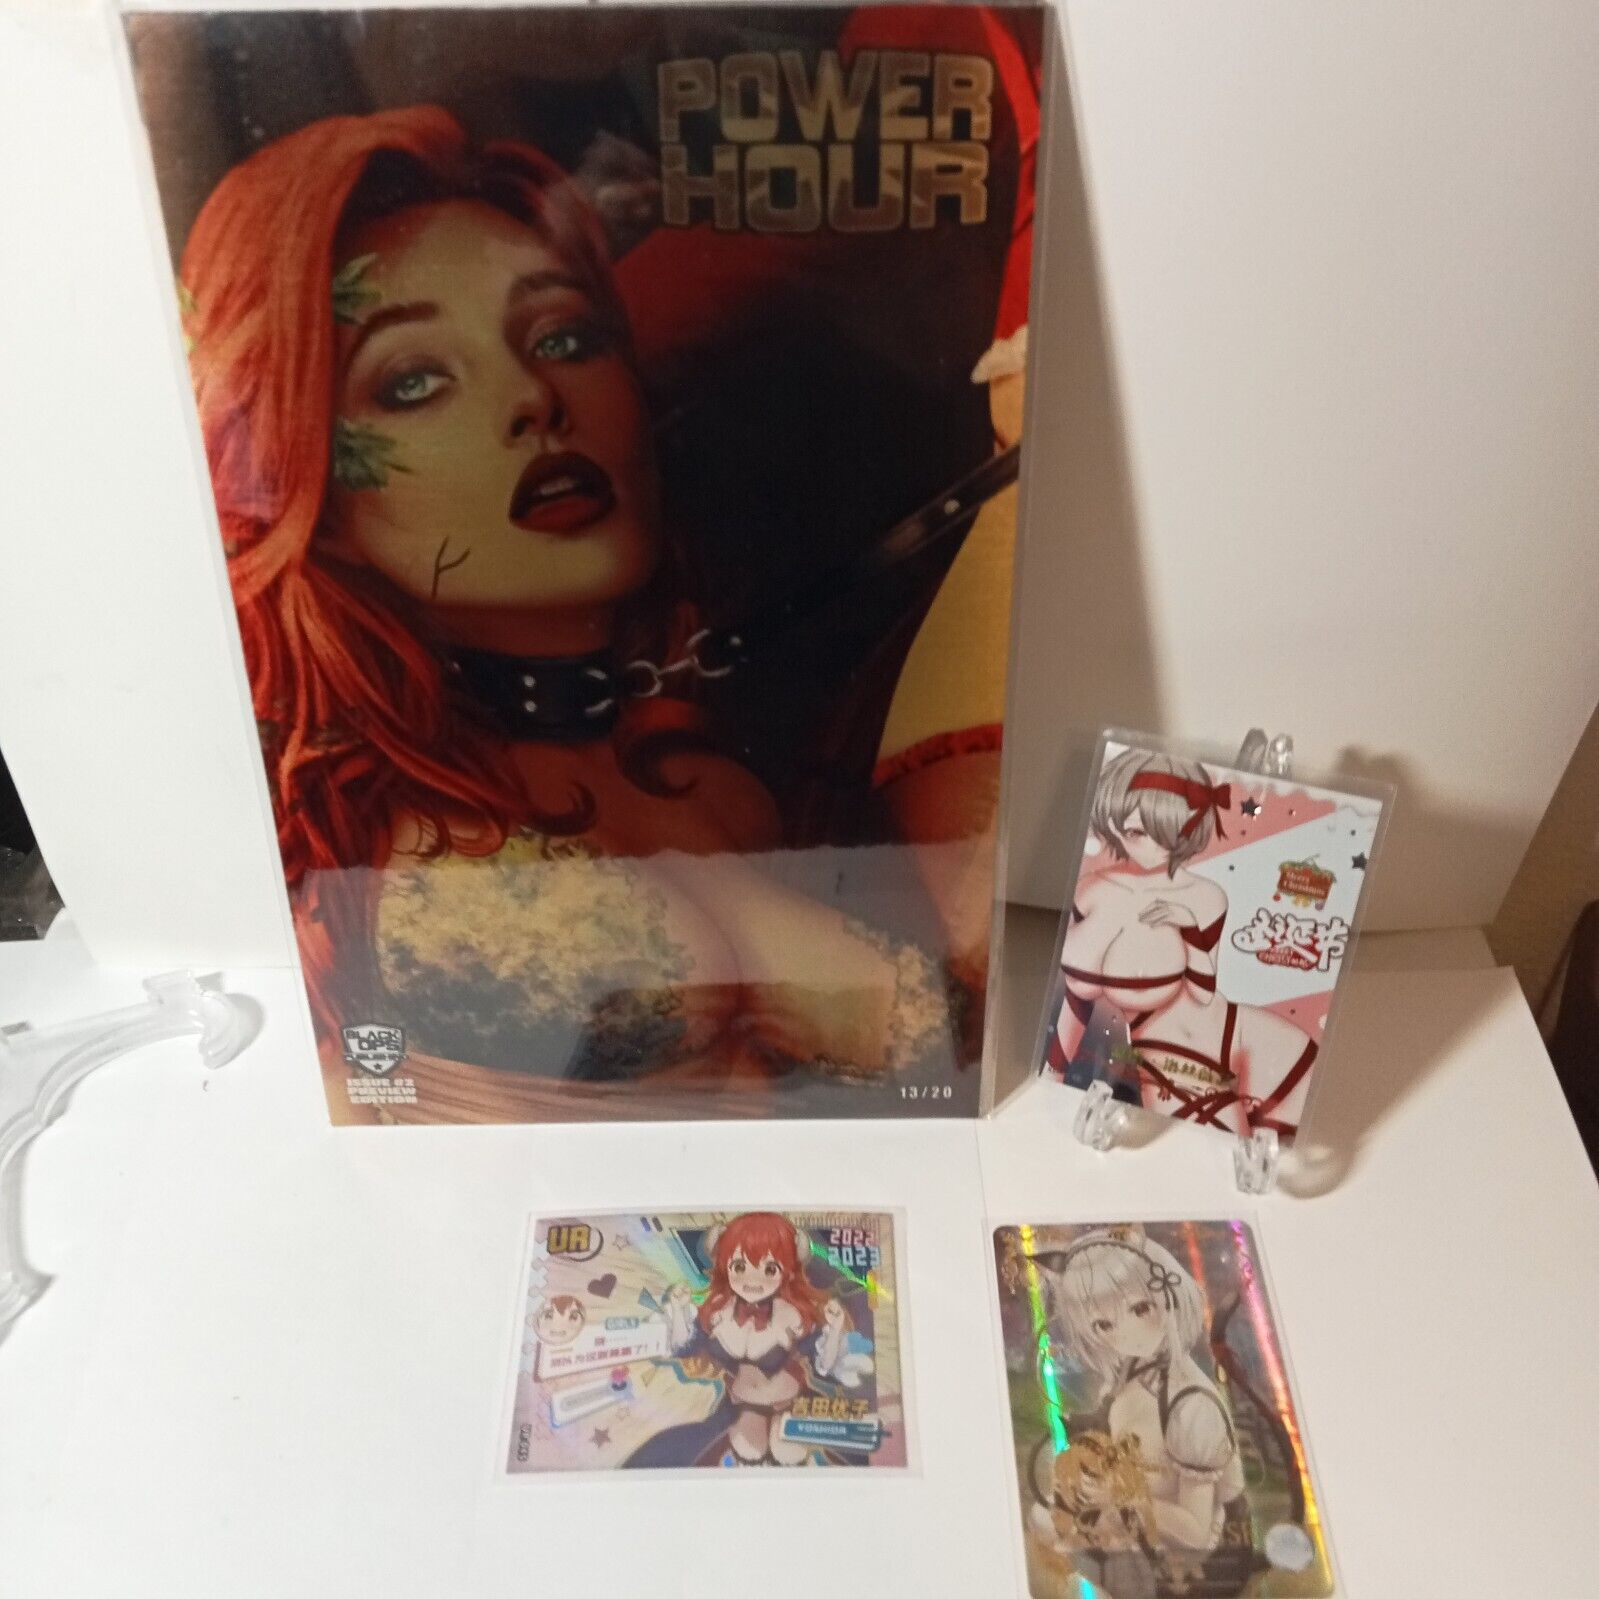 Power Hour #2 #'D / 20 METAL FOIL DUAL COVER POISON IVY + 3 GODDESS STORY CARDS